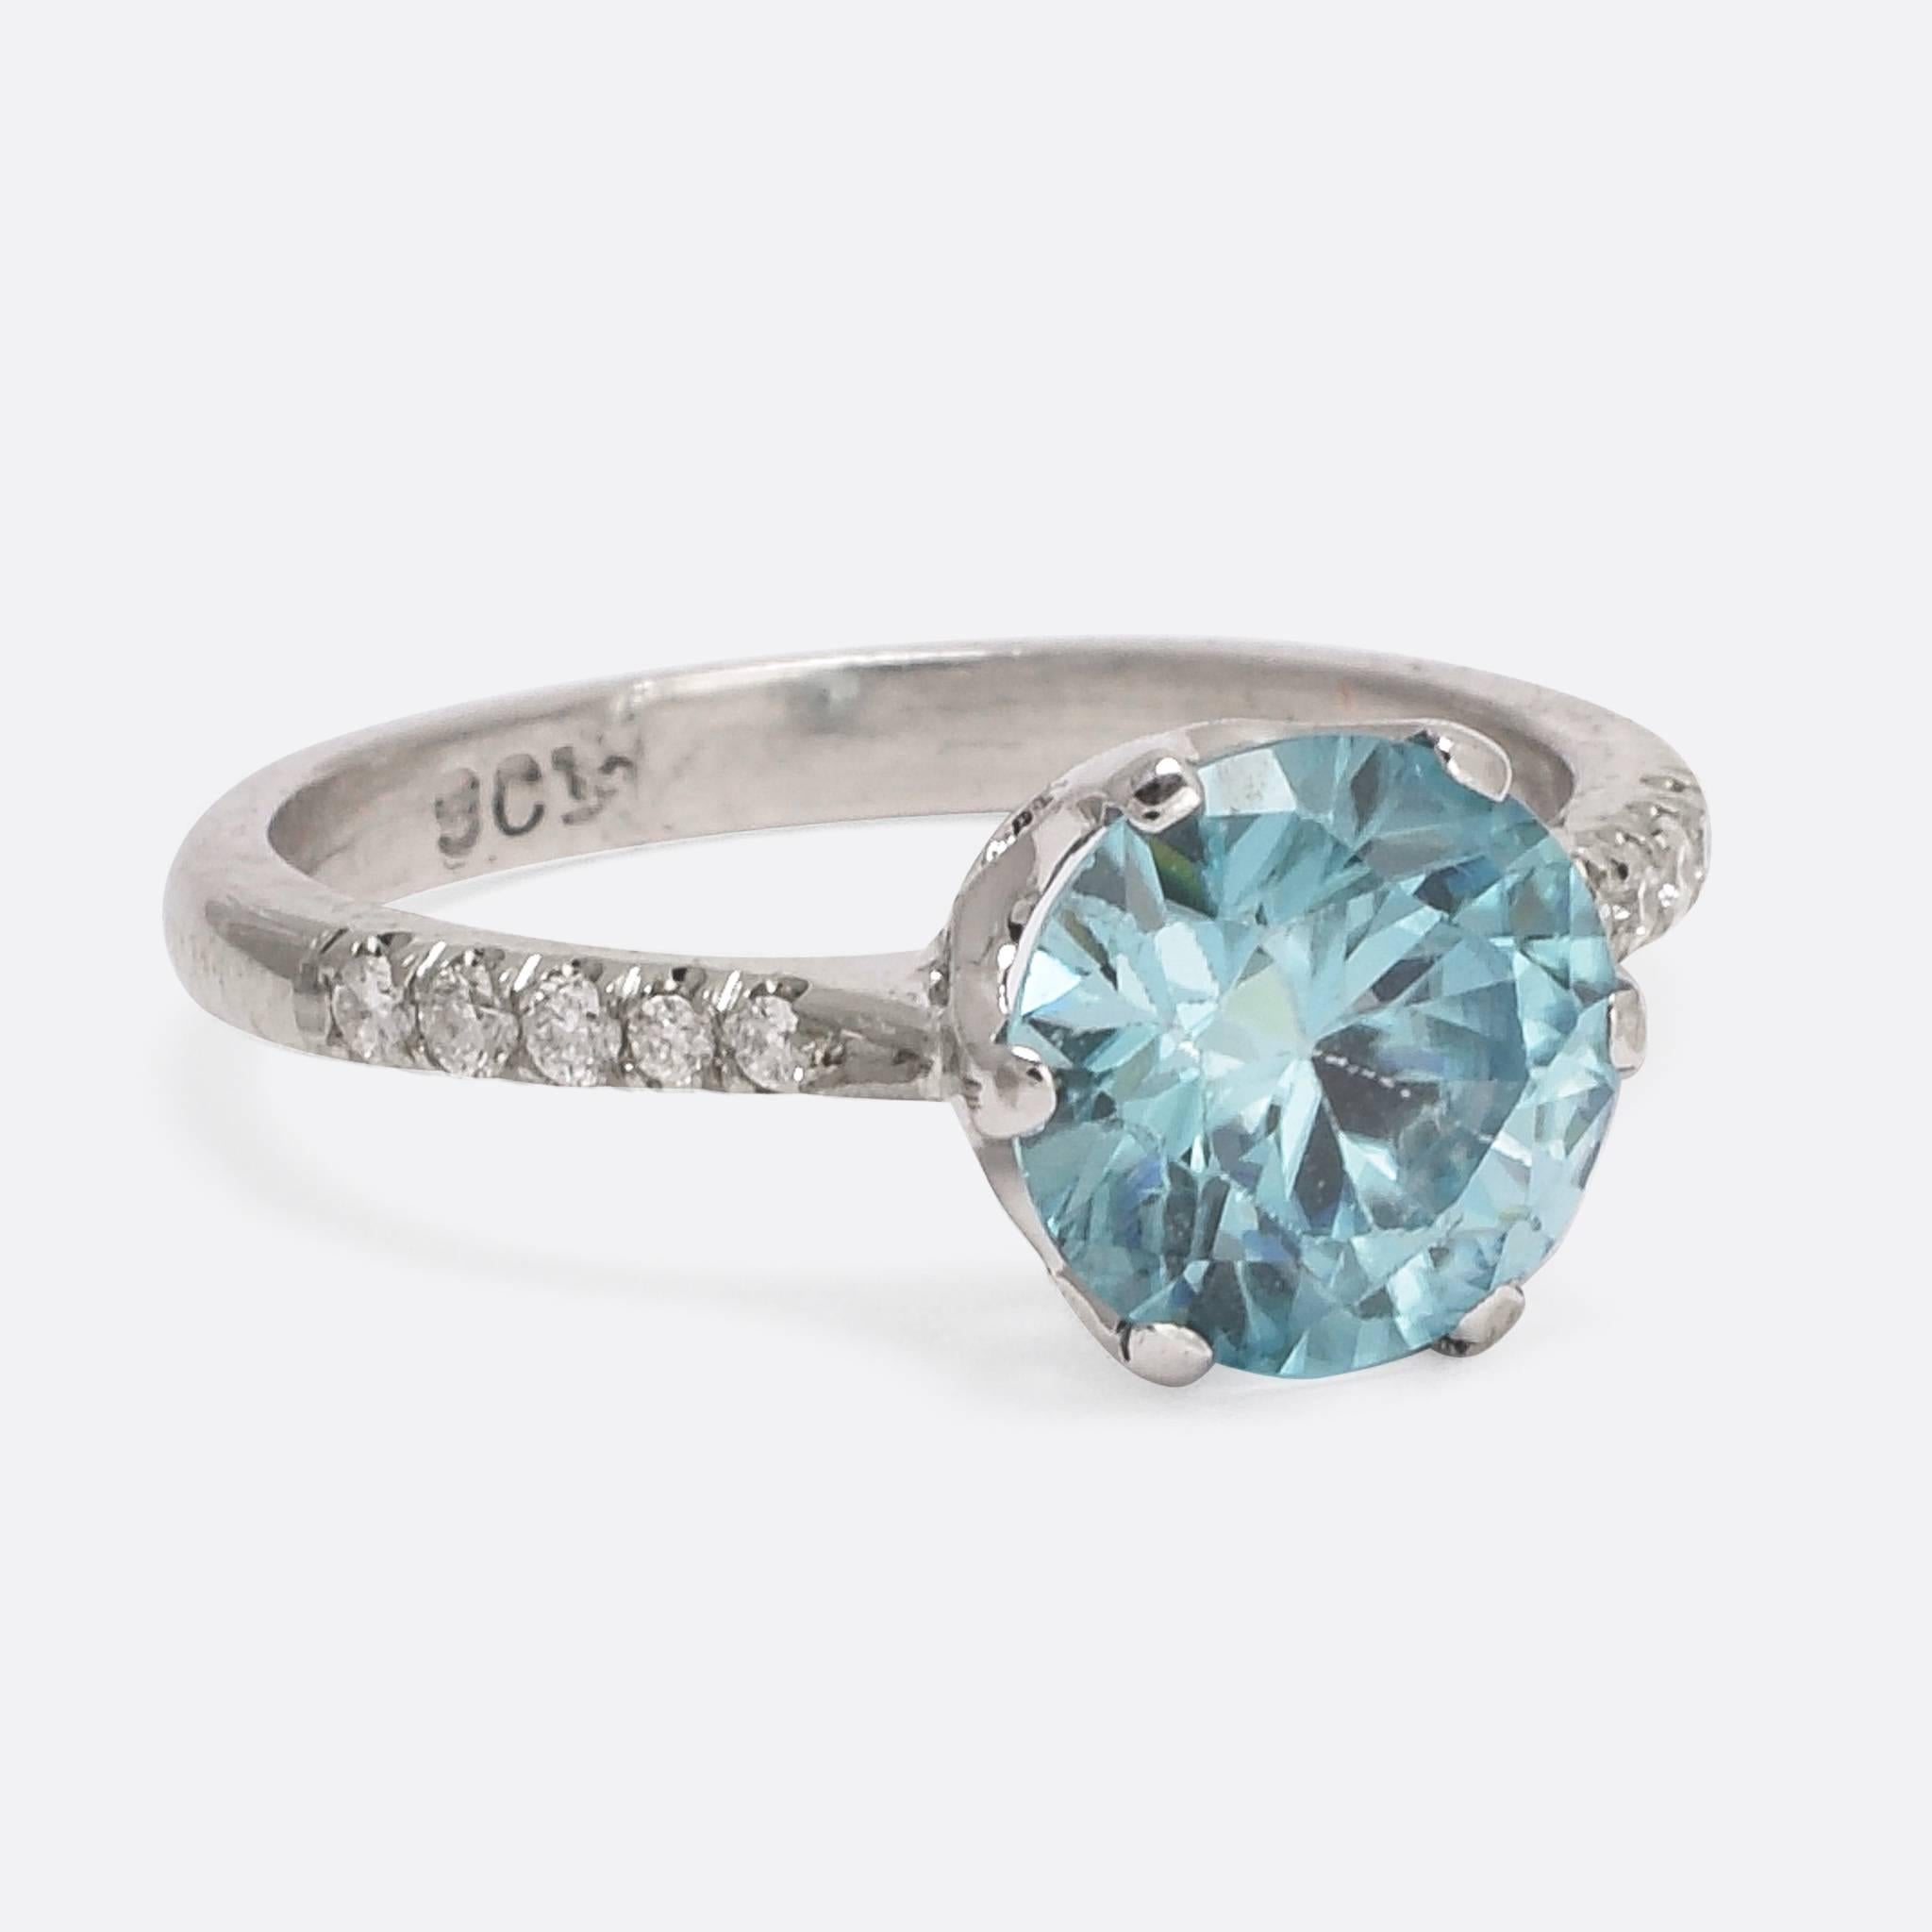 A cool early Art Deco era zircon and diamond solitaire ring. The principal stone is stunning: a lucid blue colour with bright flash and fire, it weighs just under 1.68. Modelled in white gold and platinum, it dates to the early 1920s, with elegant